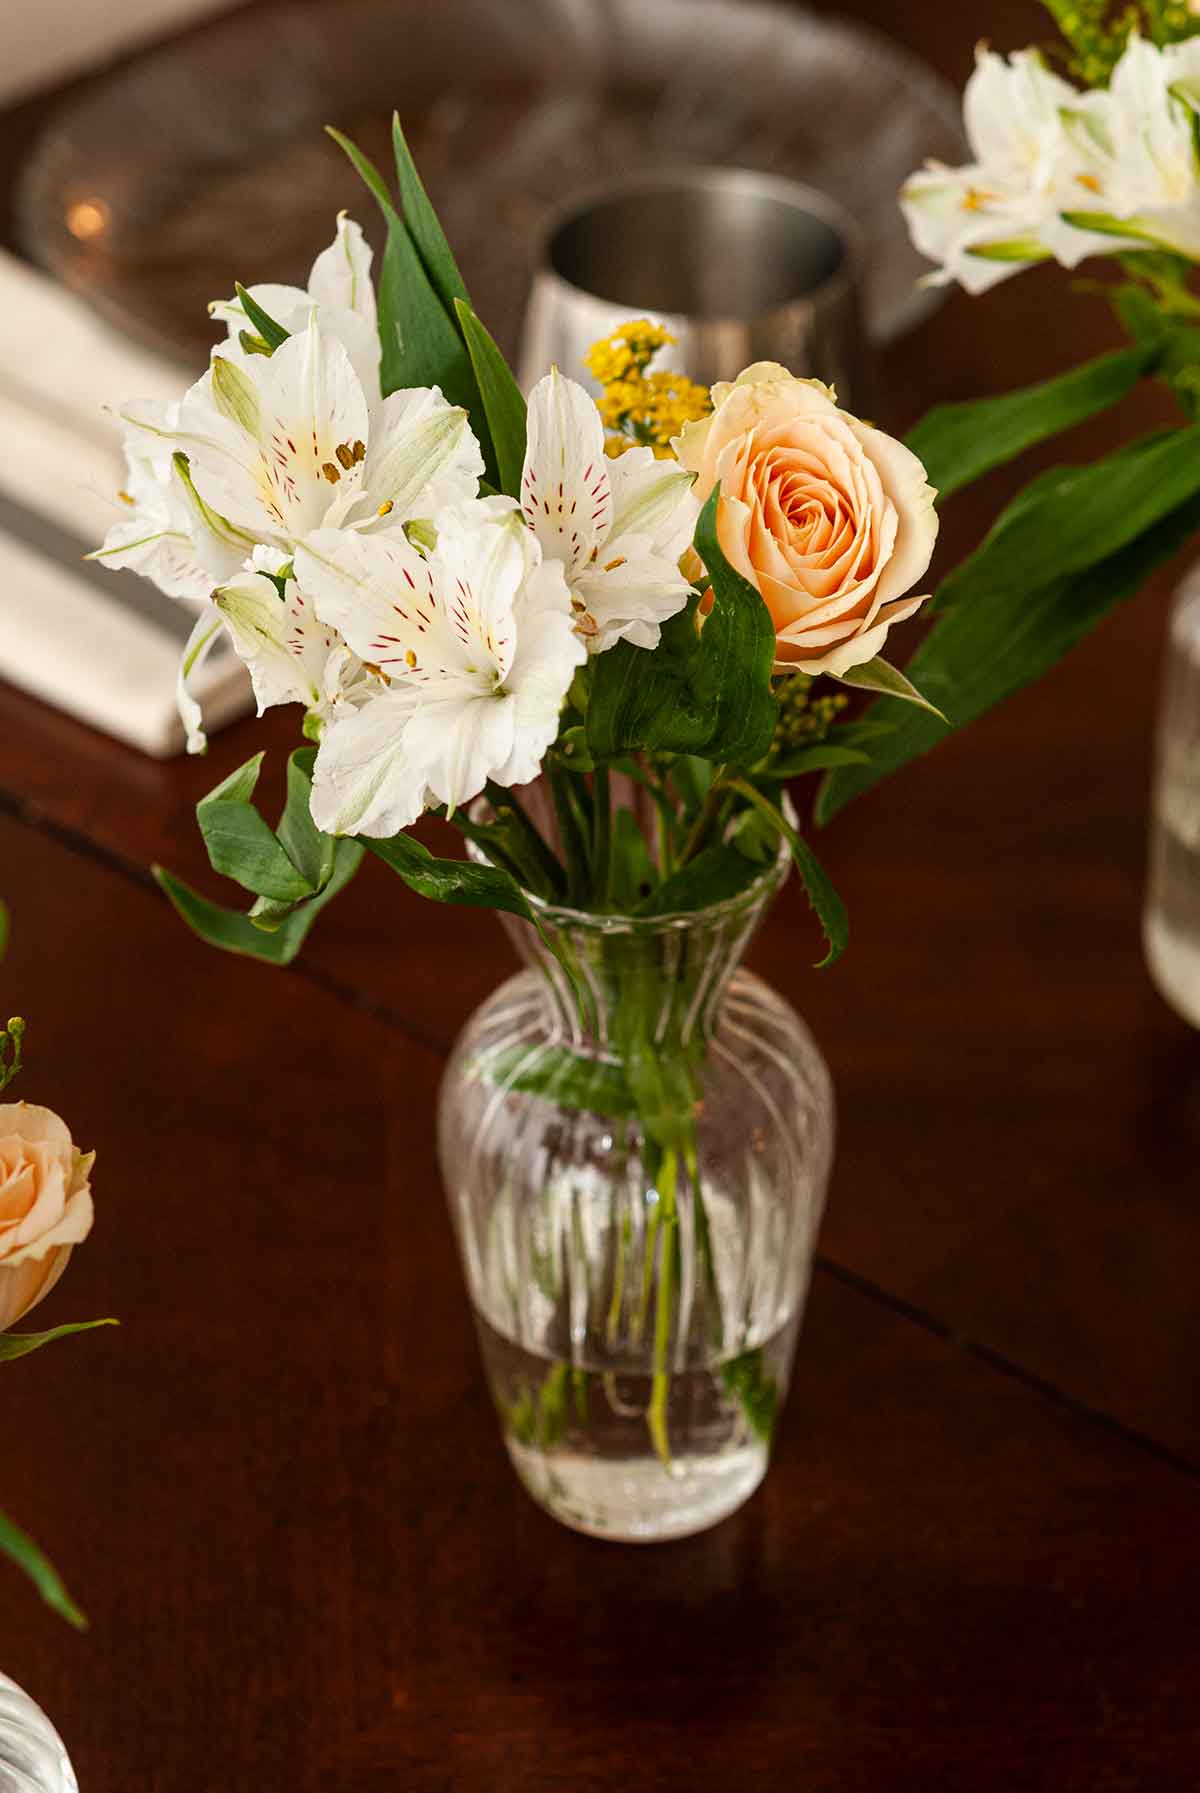 A small glass vase of flowers on a dining table.